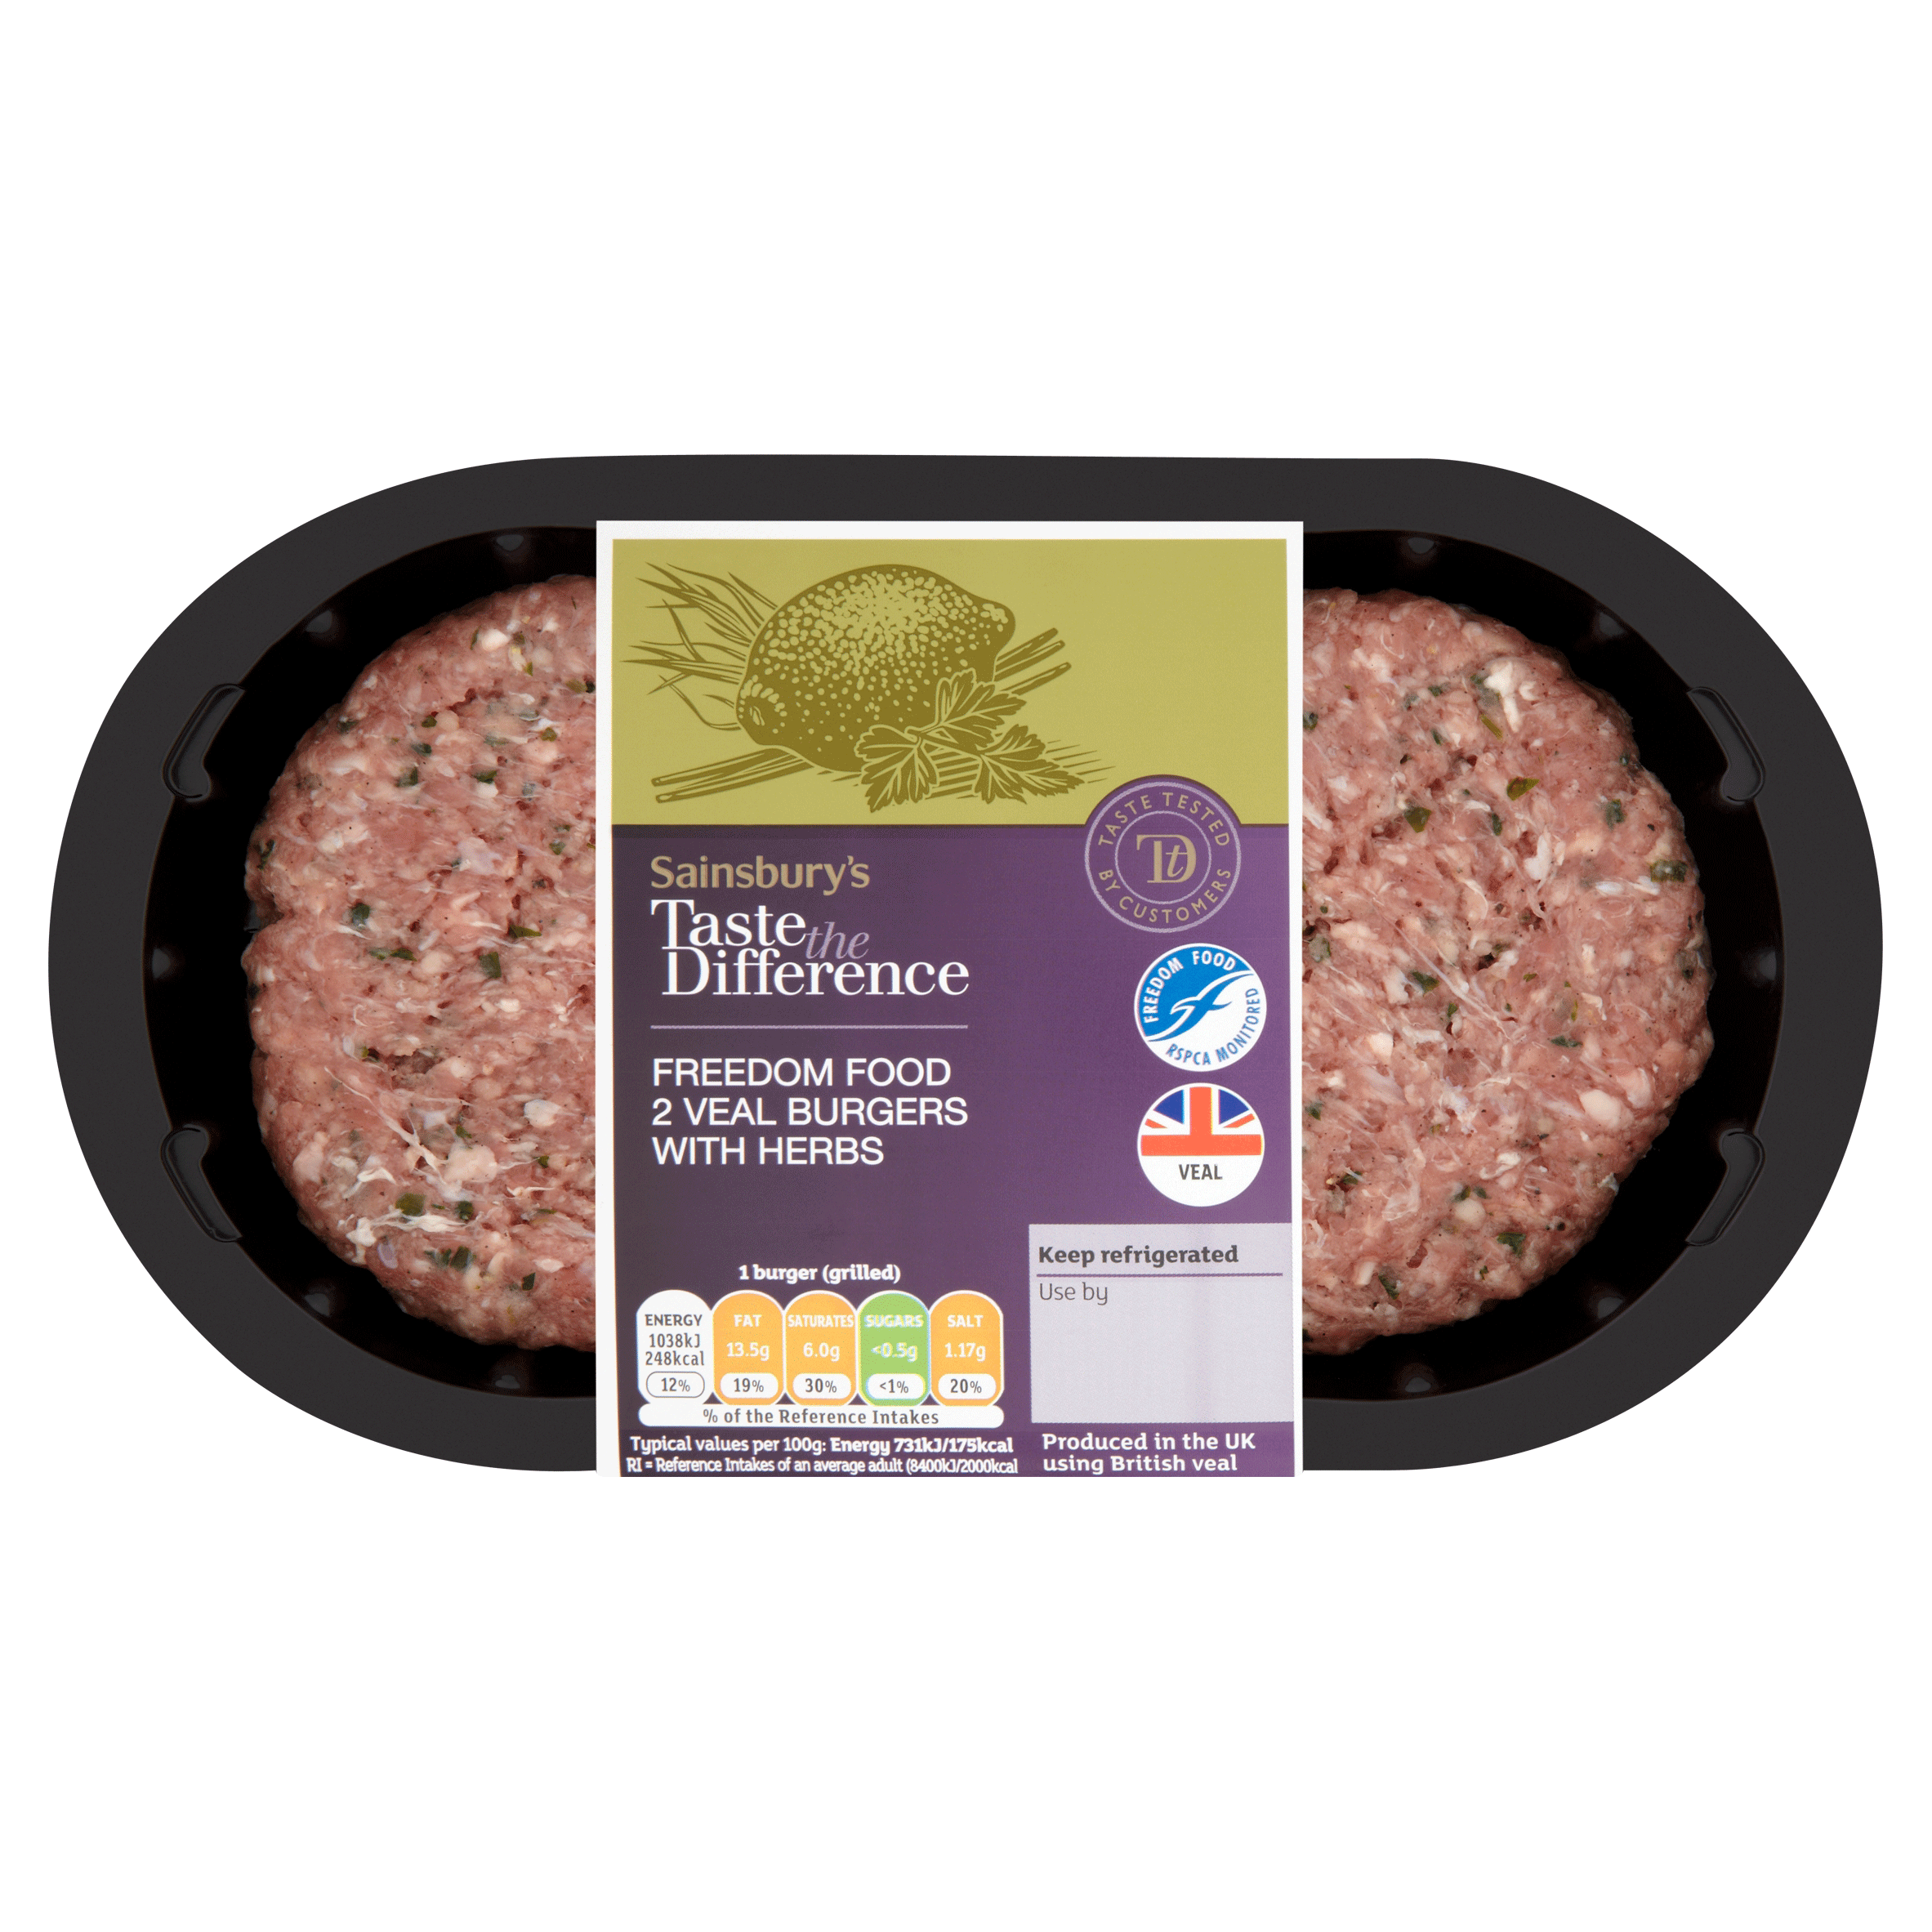 Sainsbury's Taste The Difference Veal Burgers with Herbs